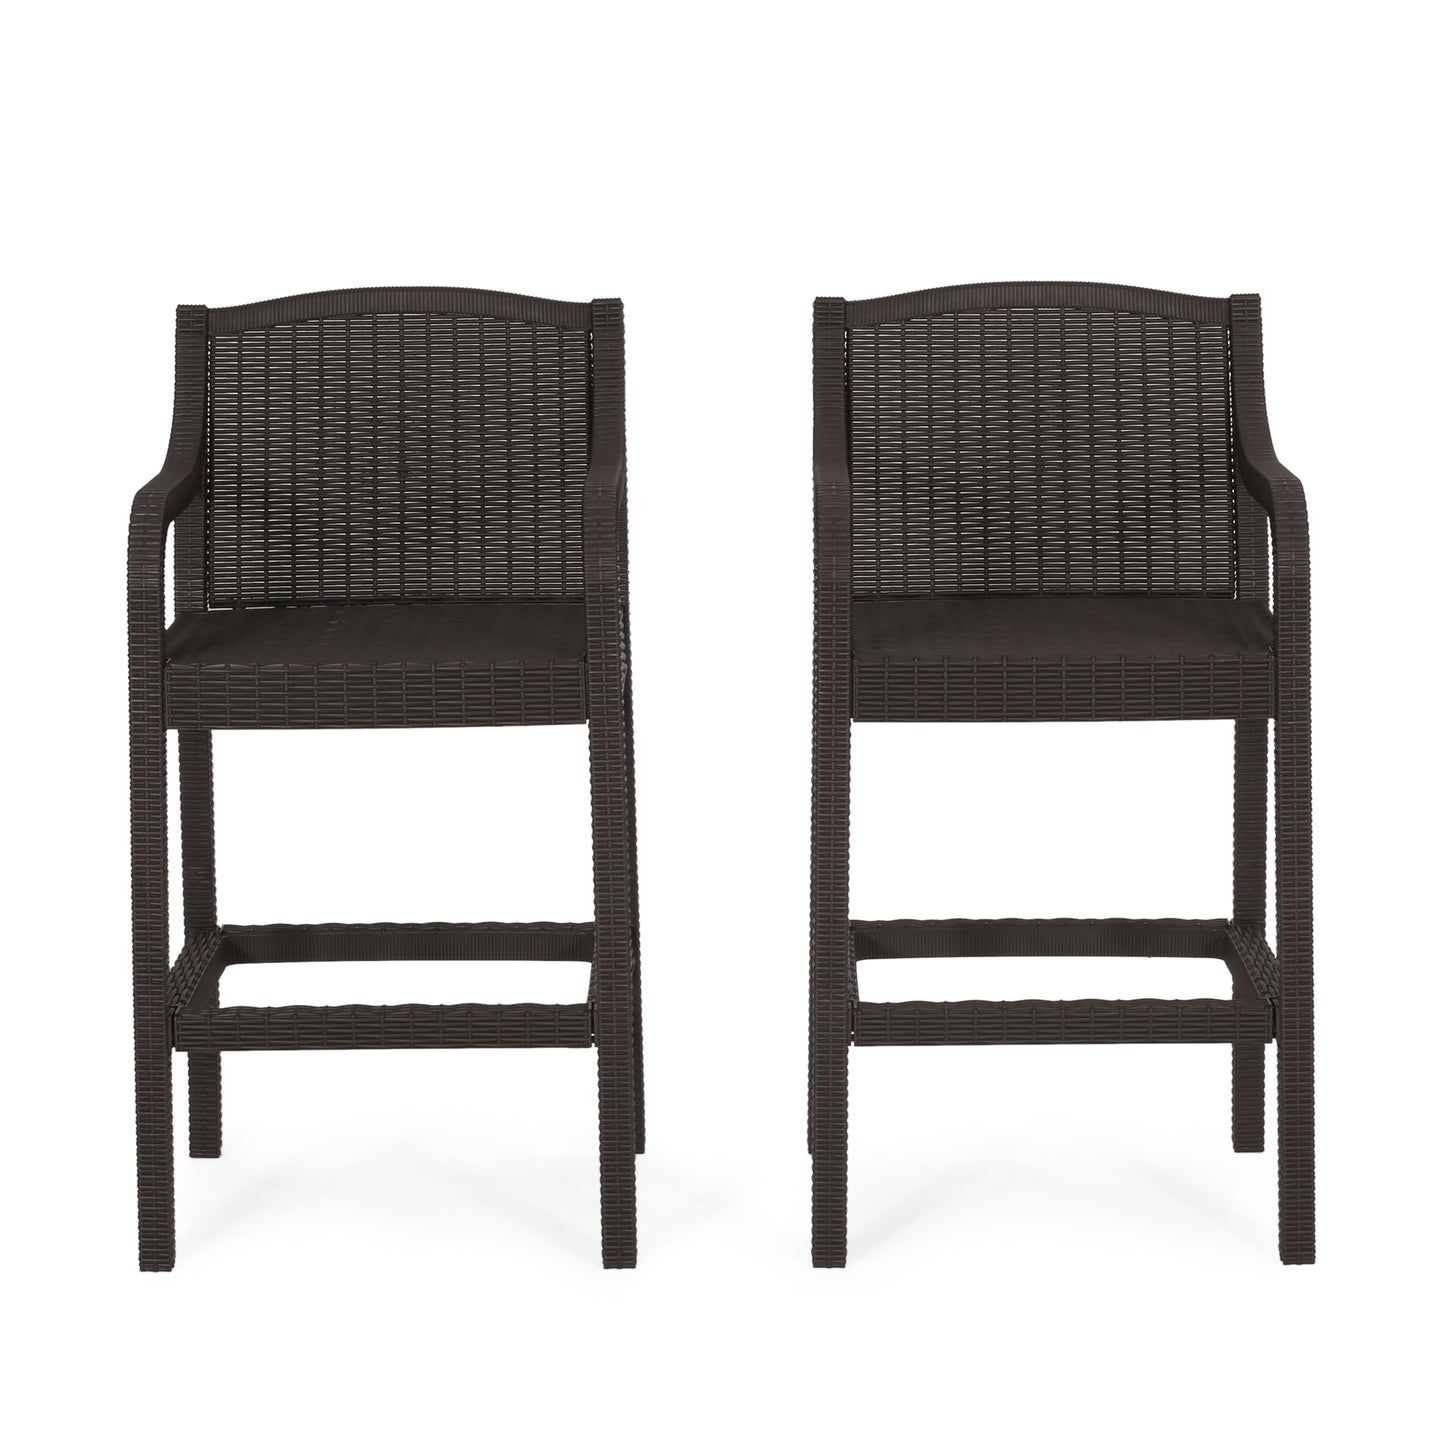 Covecrest Outdoor Faux Wicker Barstools, Set of 2, Dark Brown